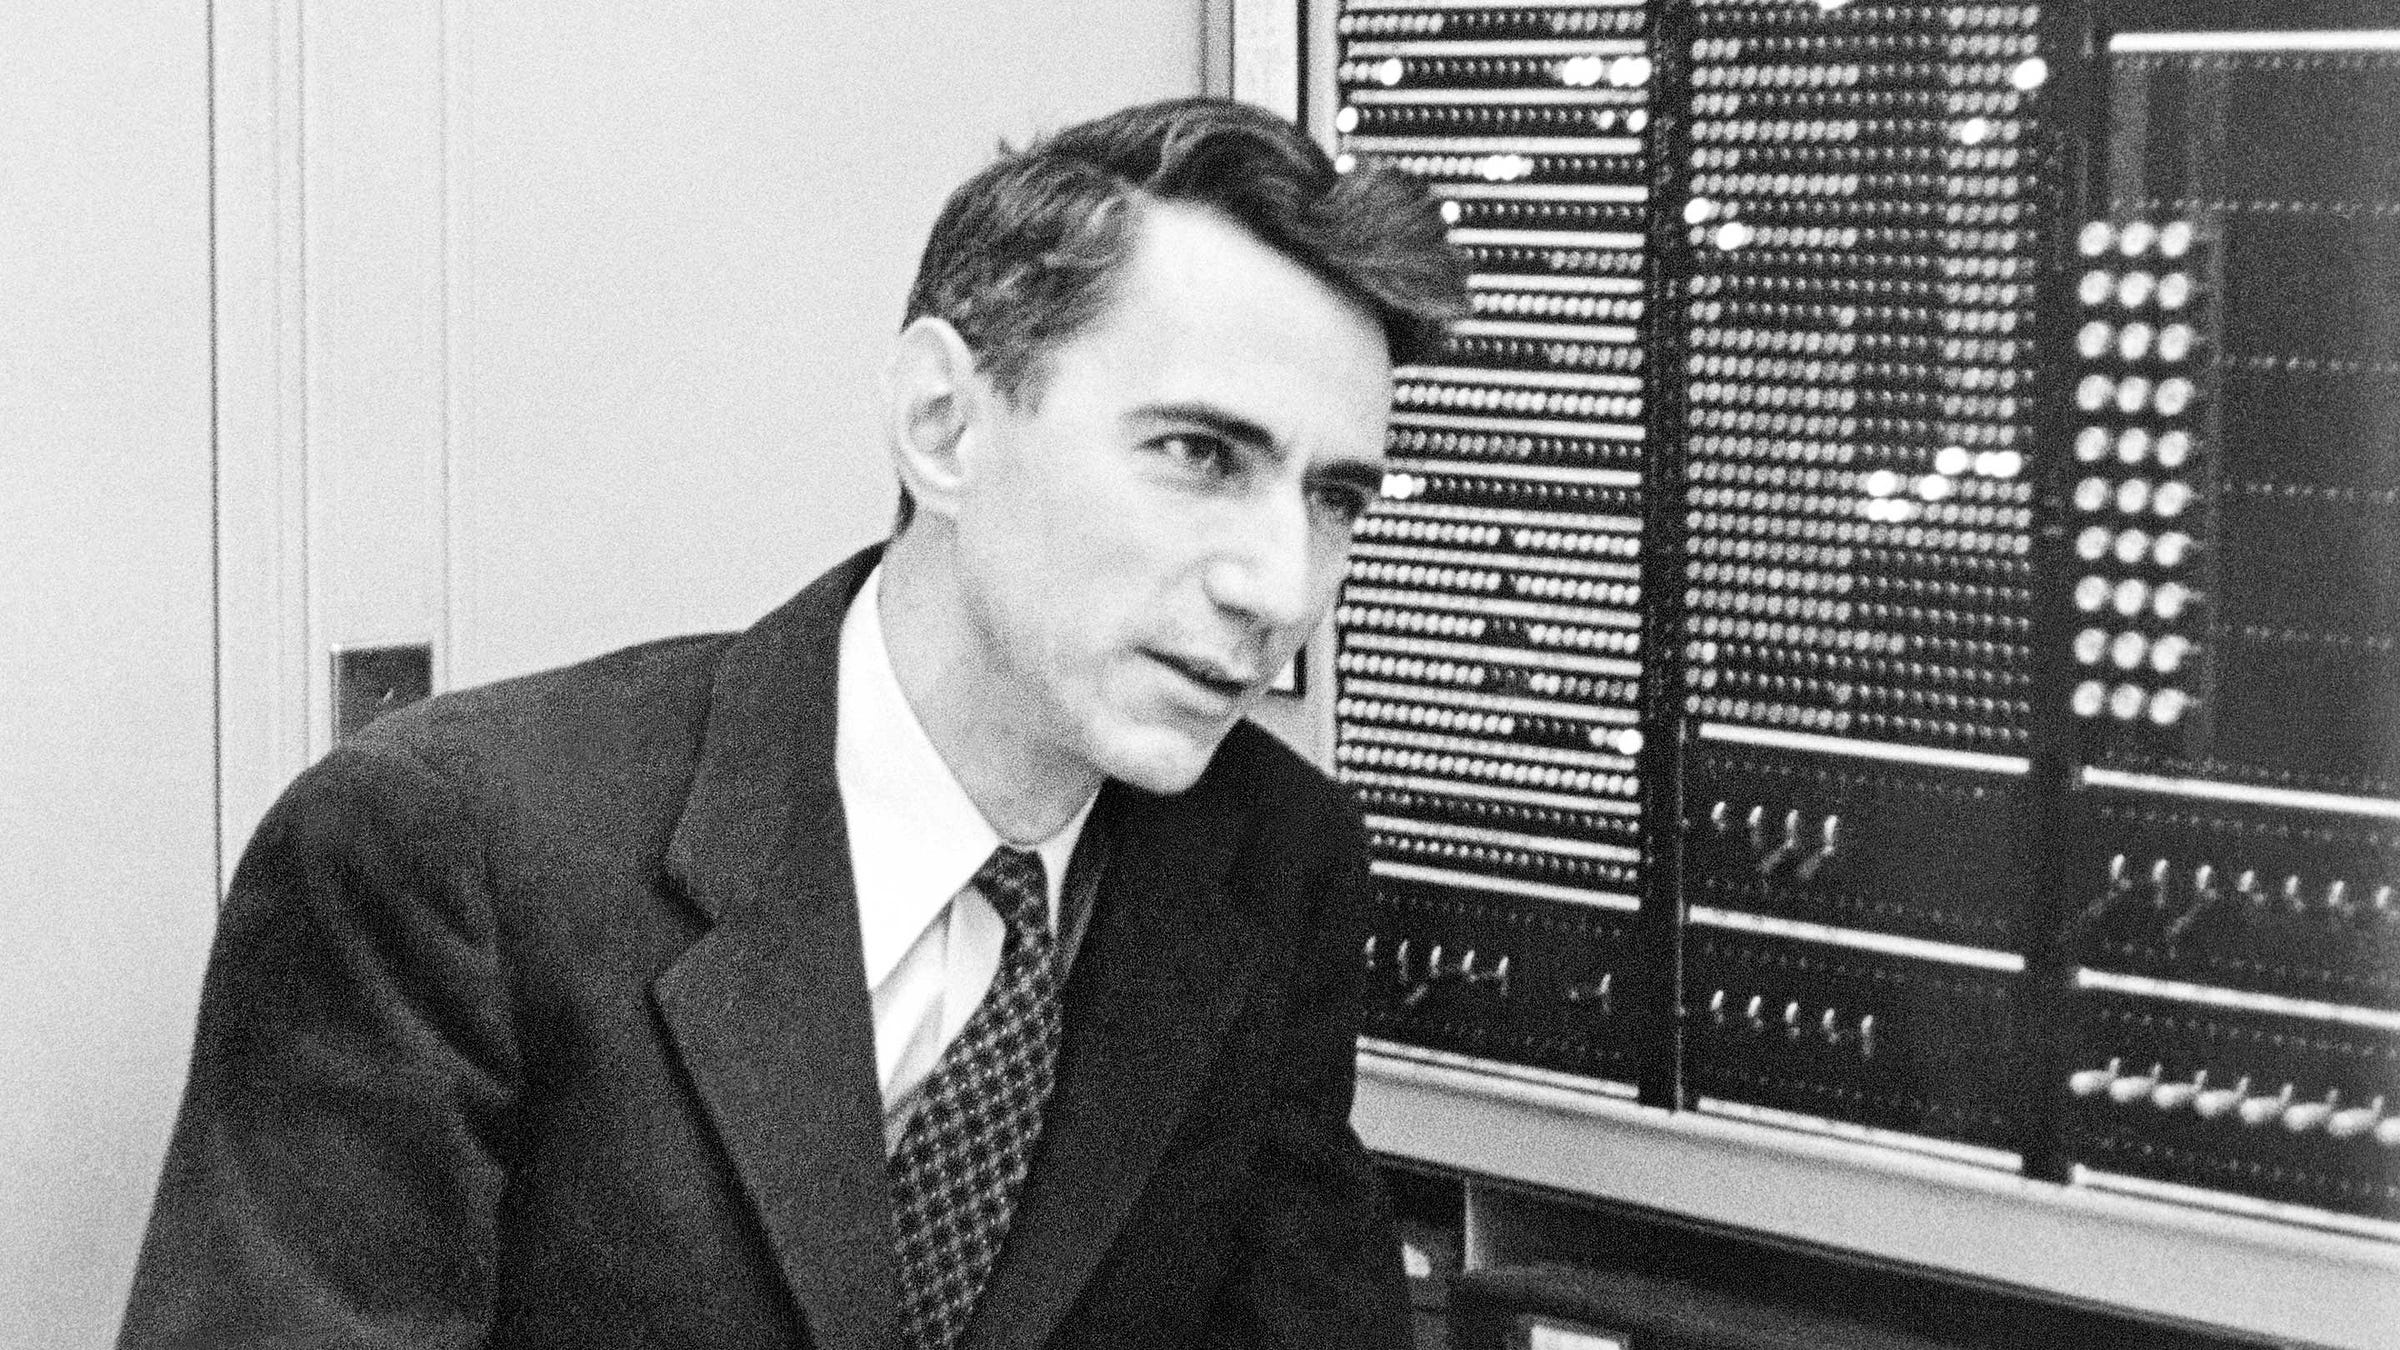 Black and white photo of Claude Shannon in front of a computer